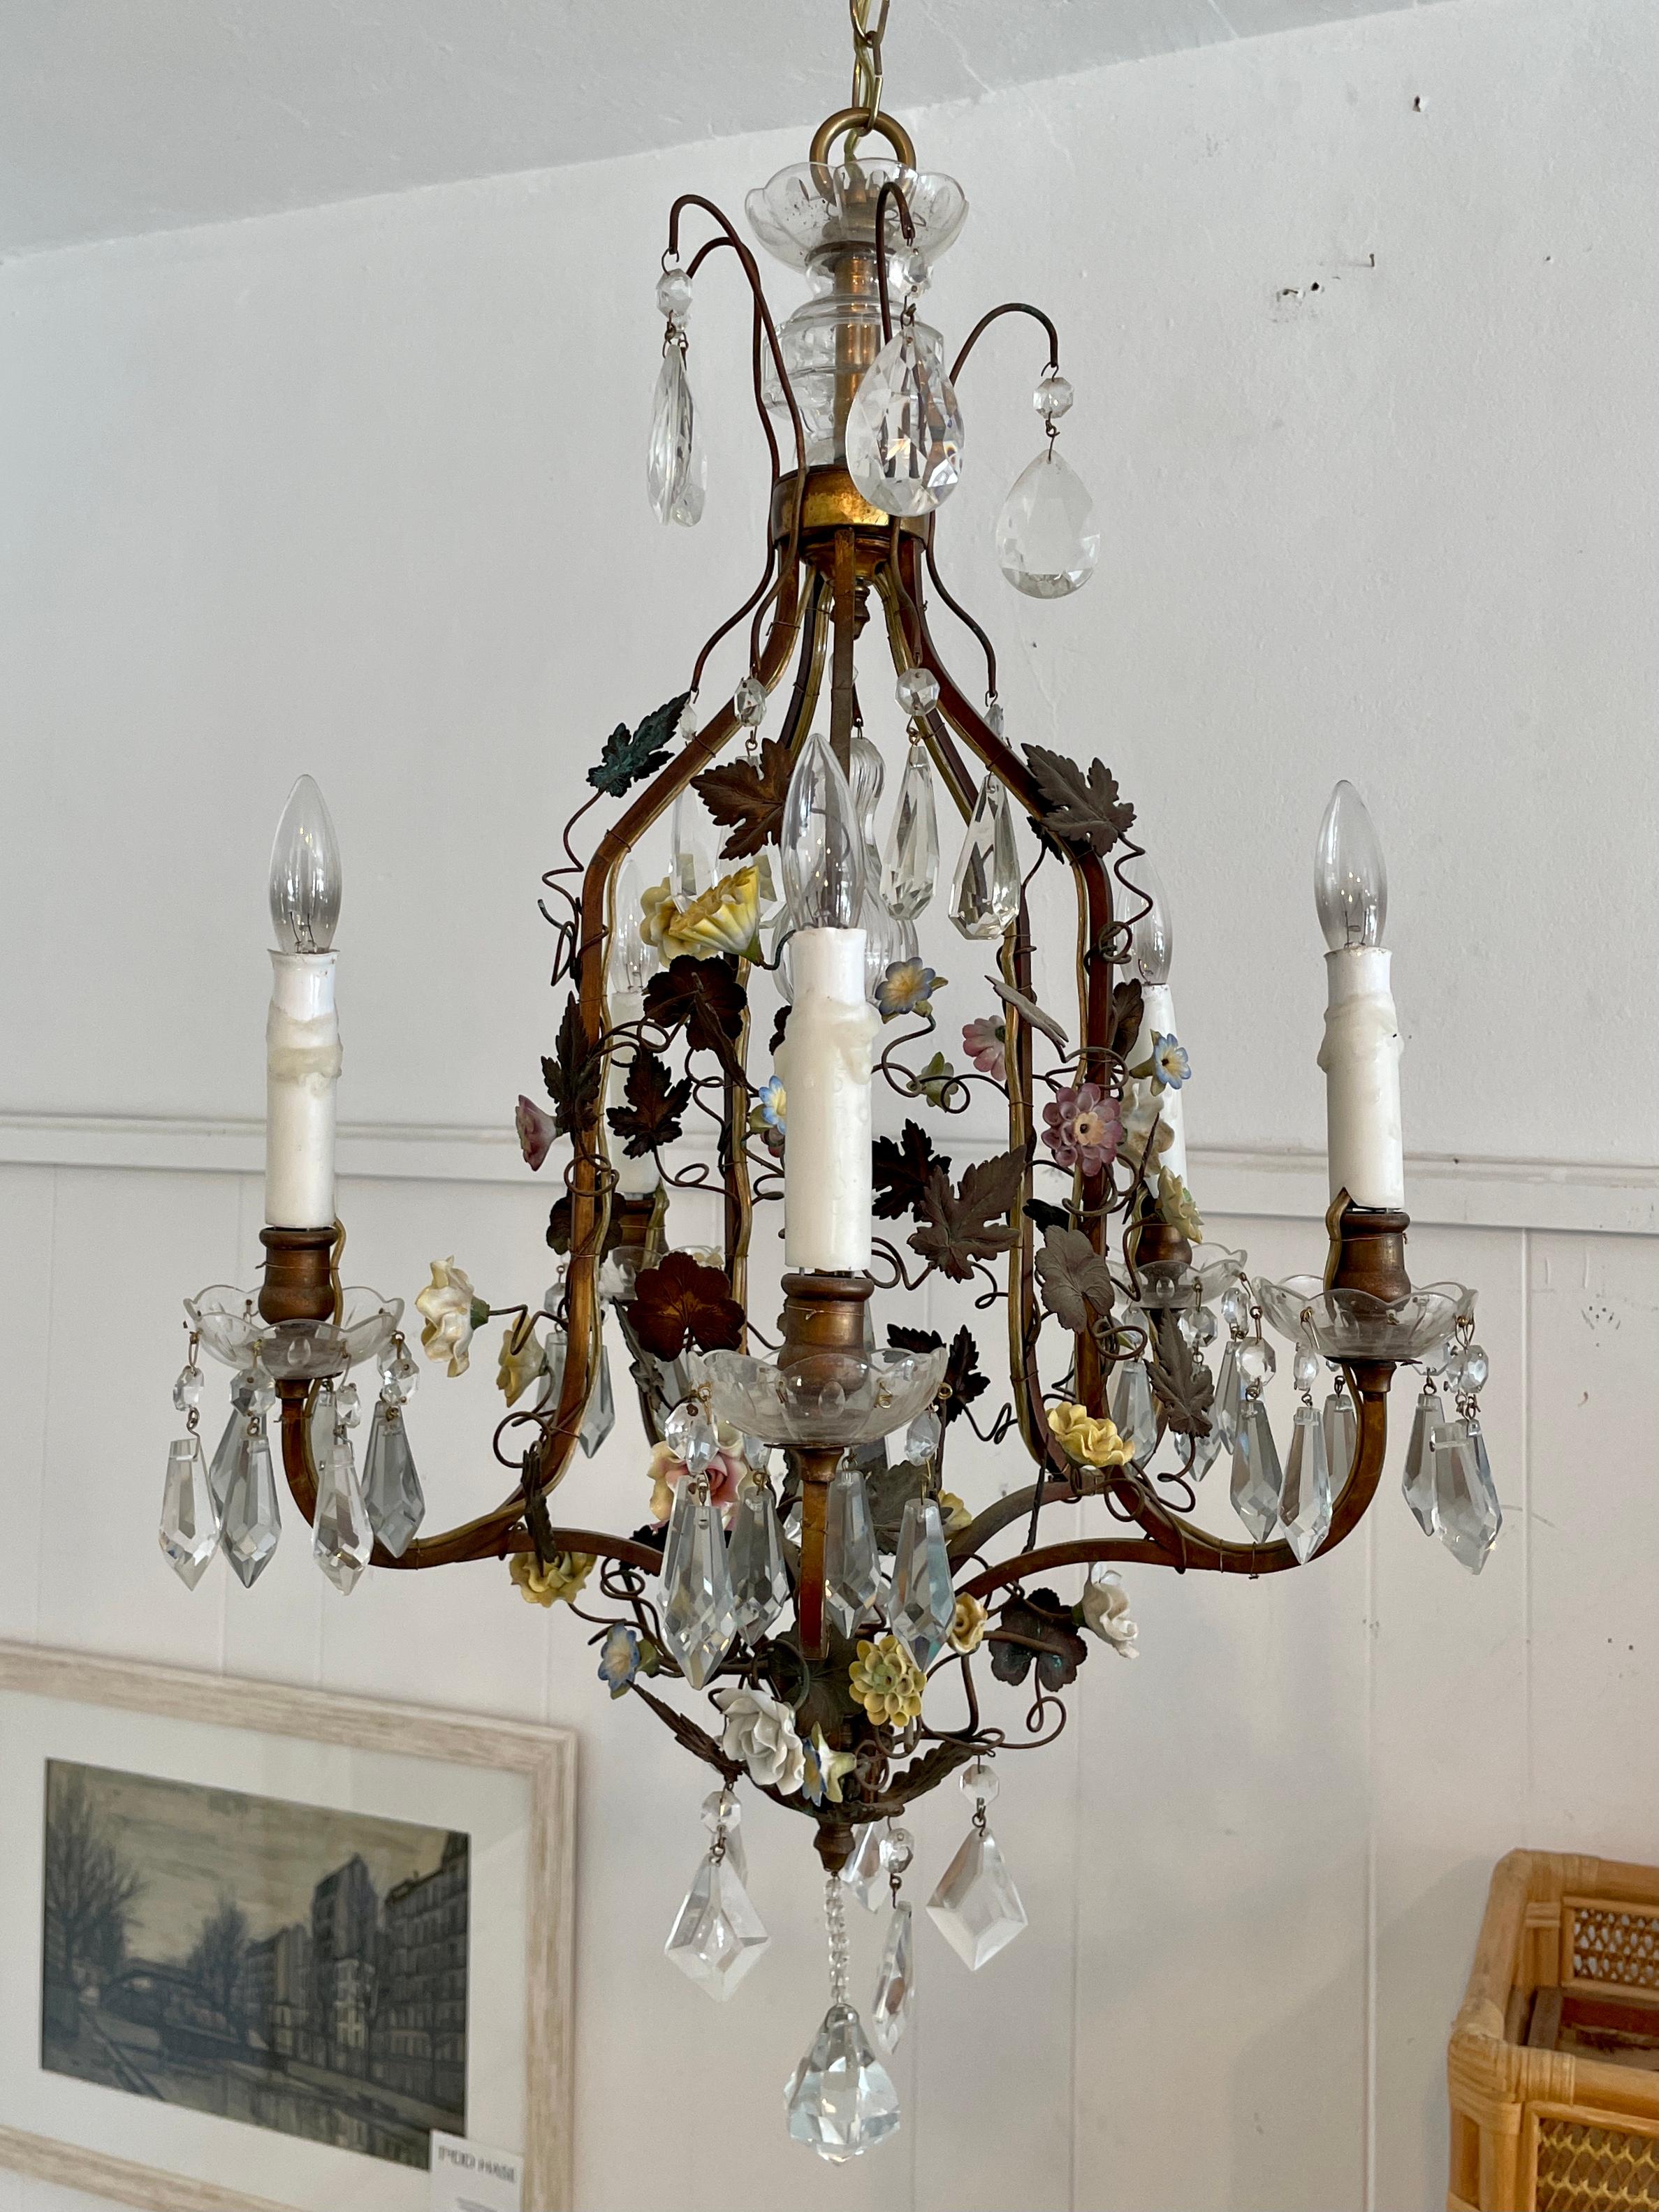 French Provincial French Tole with Porcelain Flower Details Chandelier For Sale